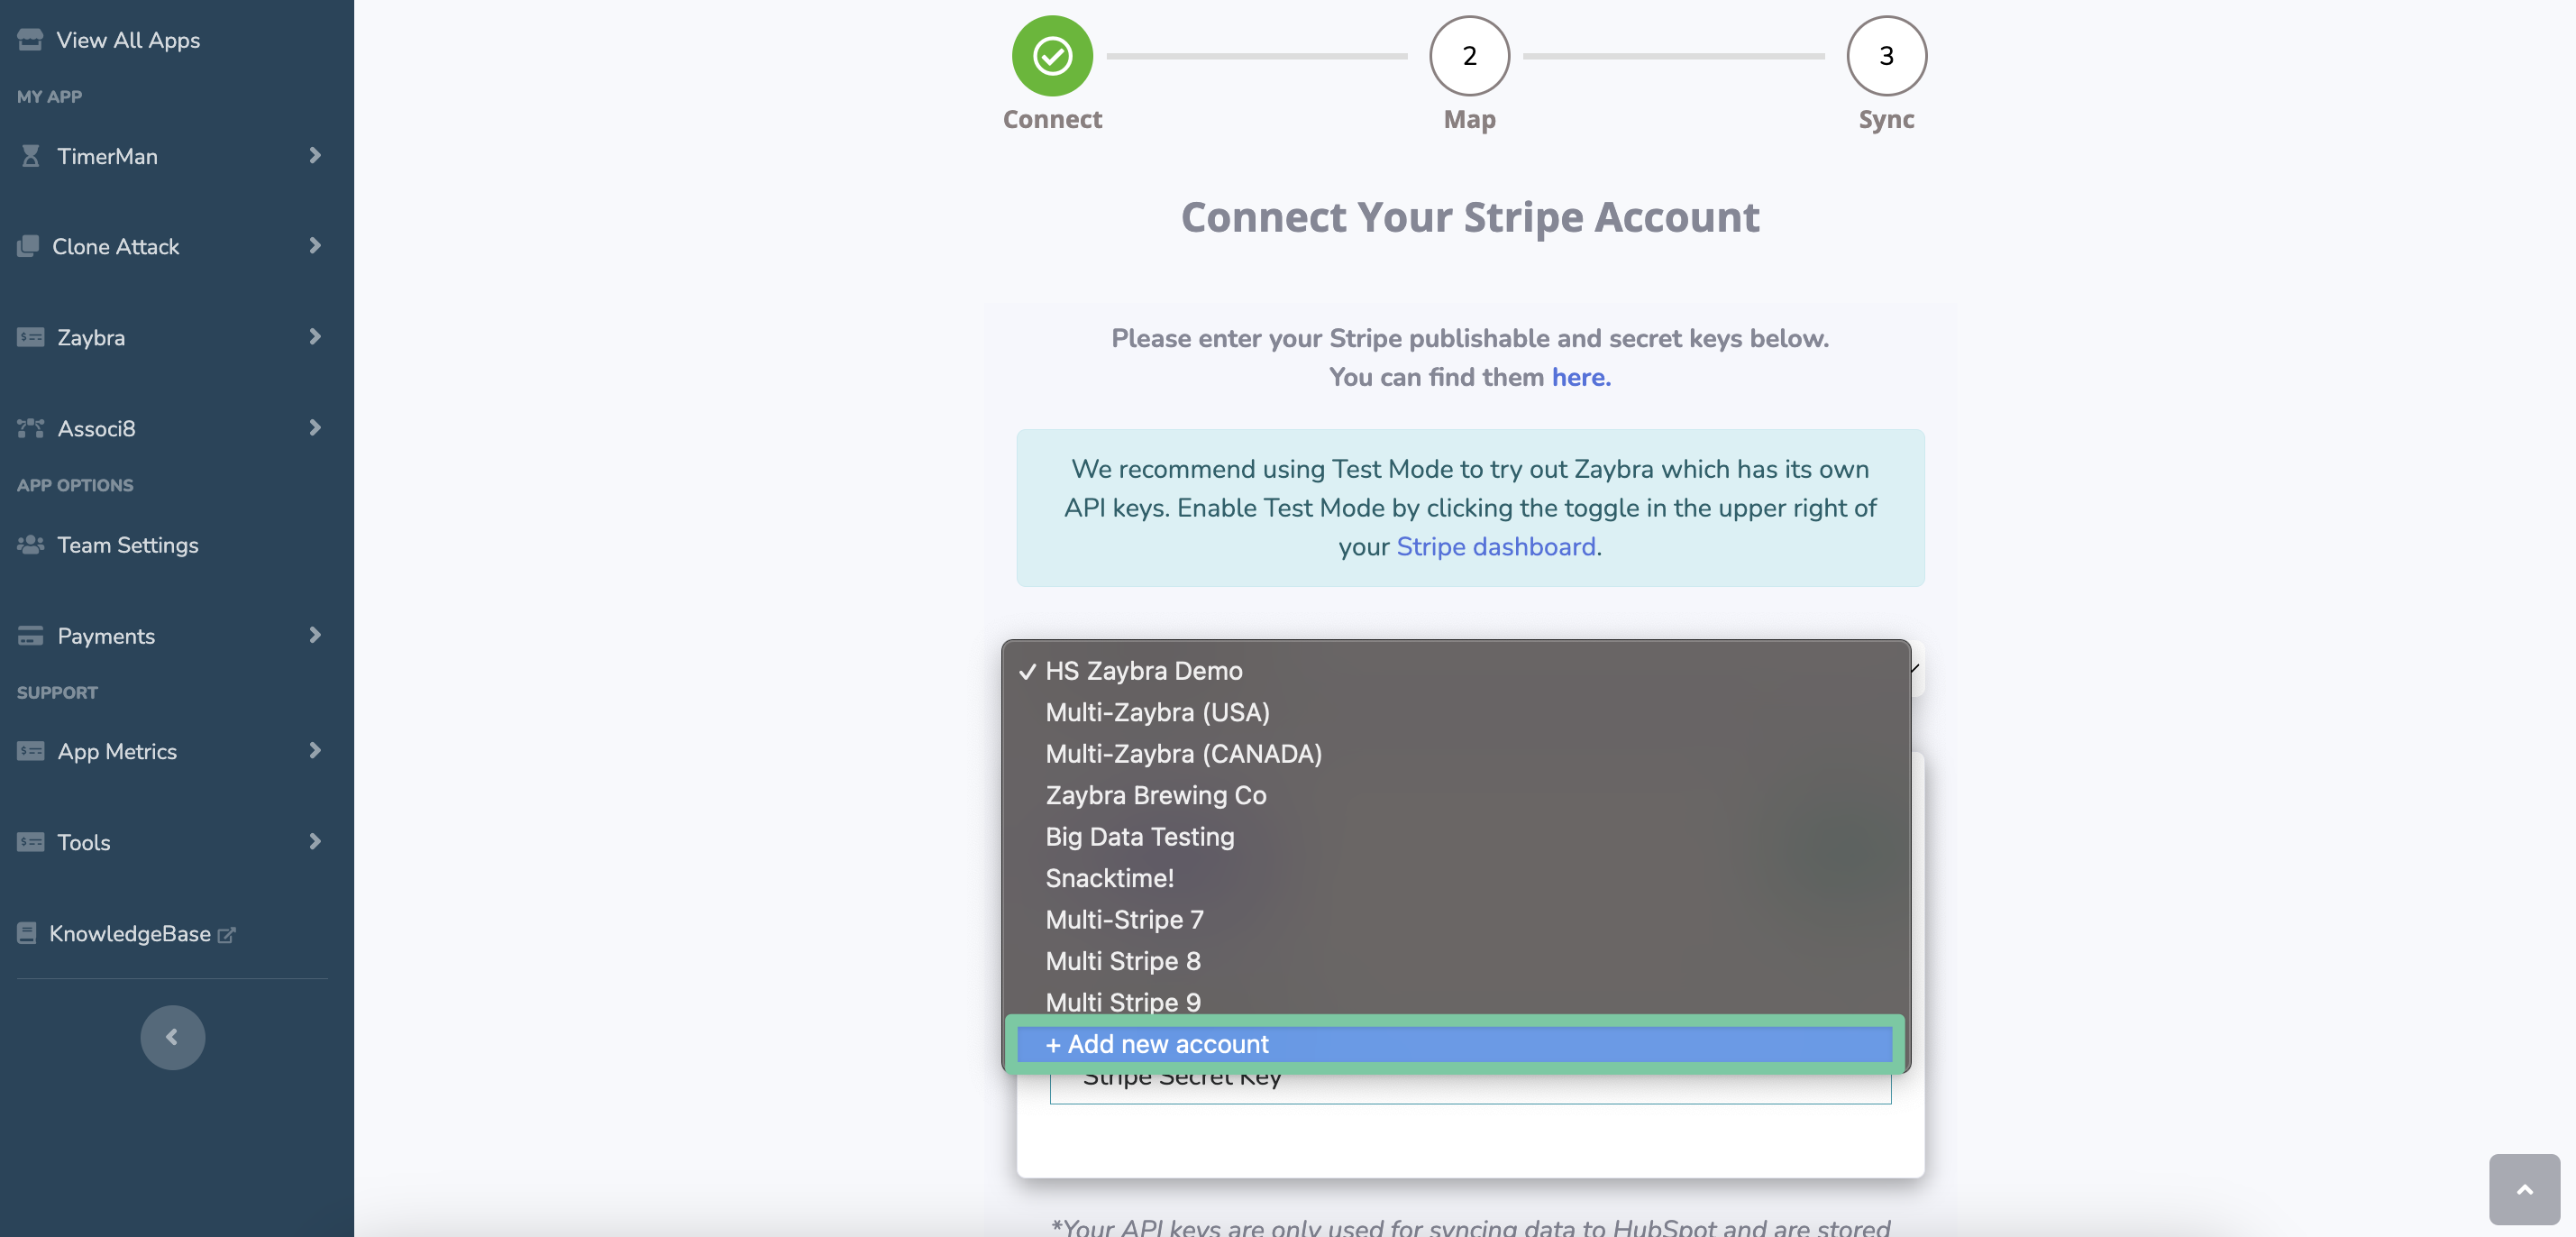 How to sync multiple stripe account into HubSpot at the same time